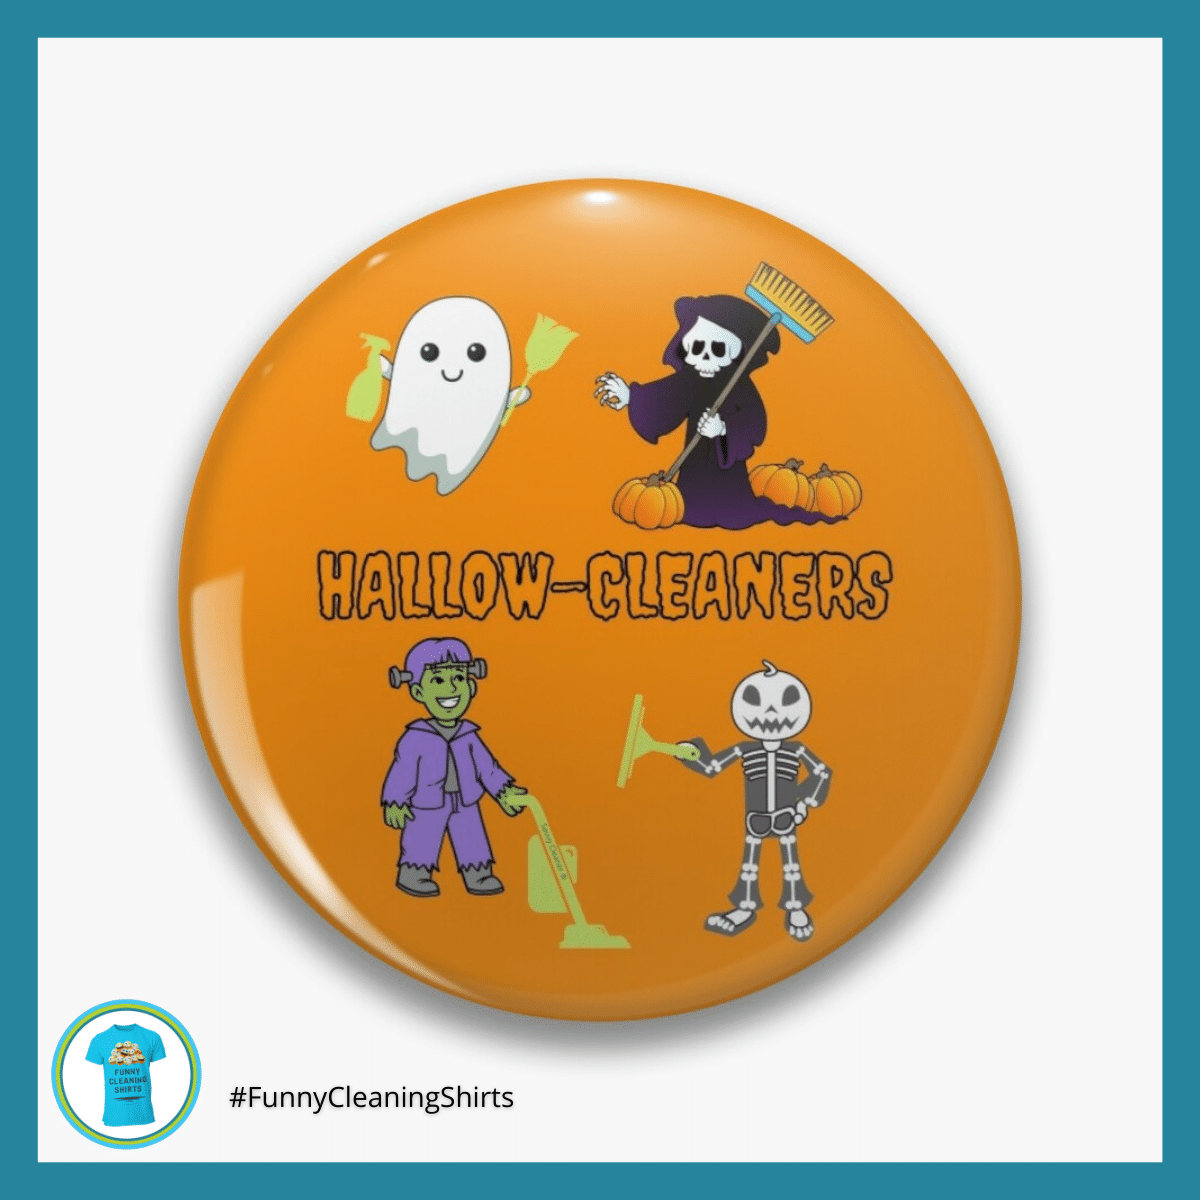 Hallow-Cleaners Savvy Cleaner Funny Cleaning Shirts Pin